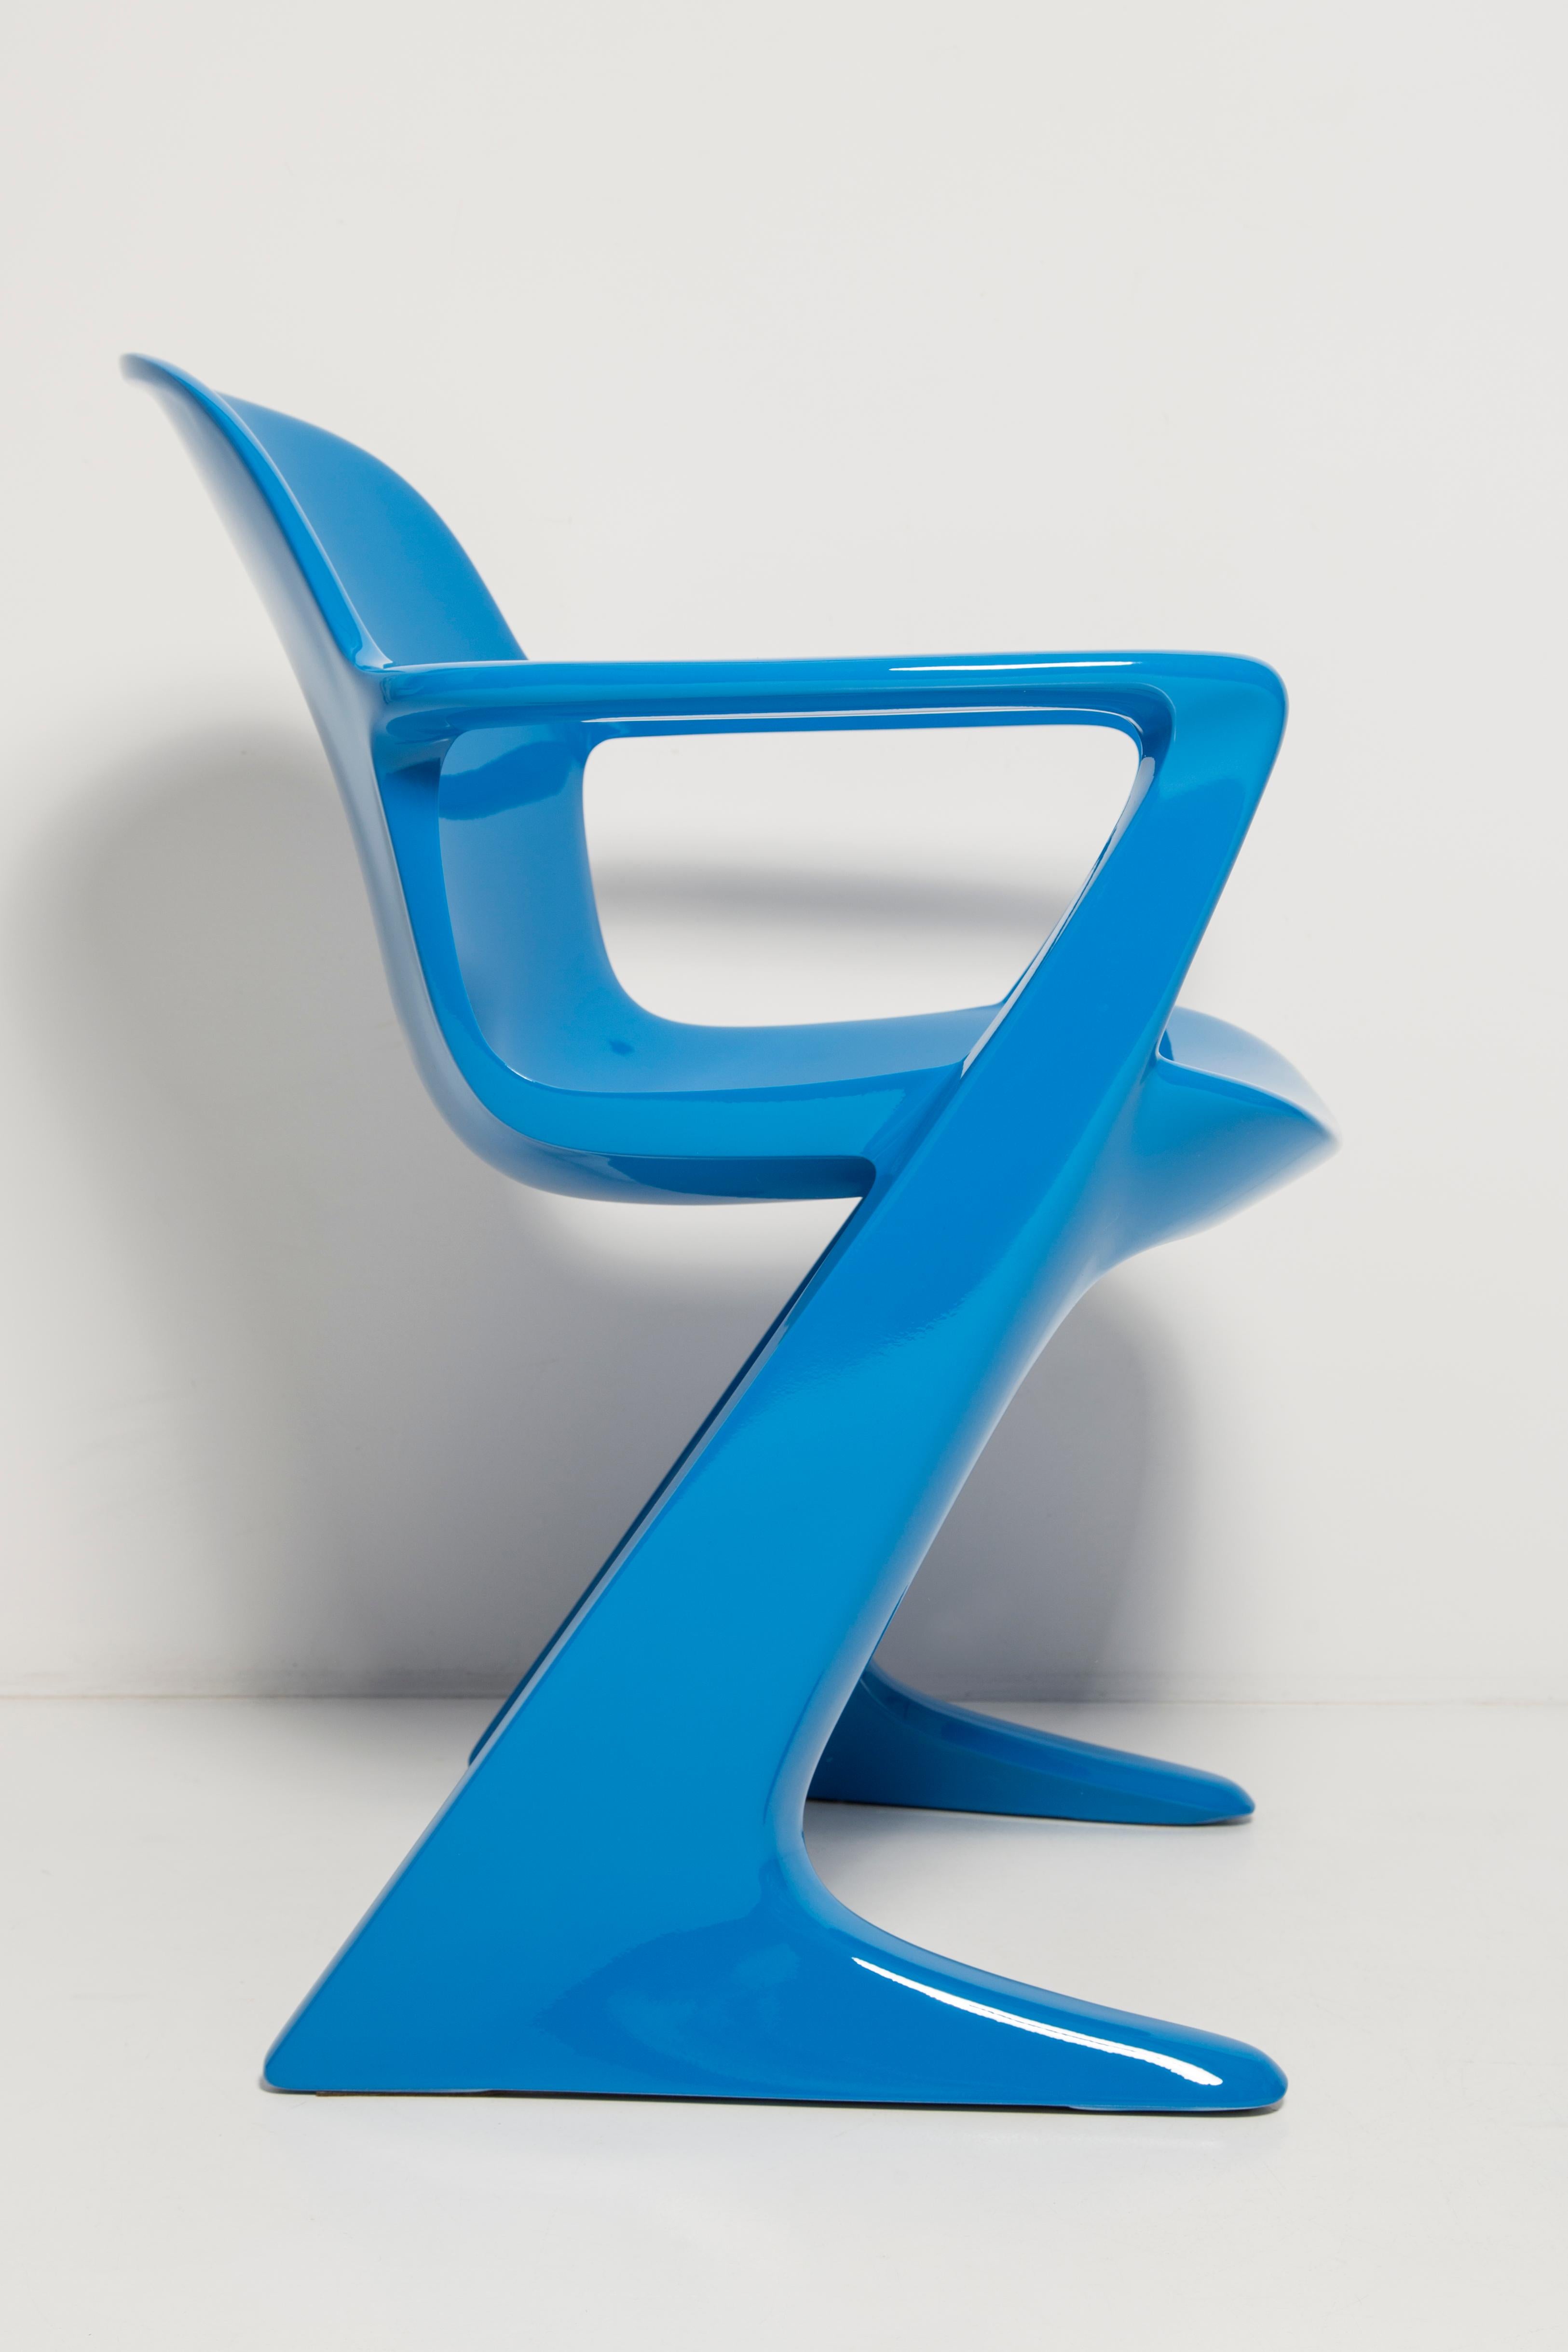 Set of Two Blue Kangaroo Chairs Designed by Ernst Moeckl, Germany, 1968 For Sale 2